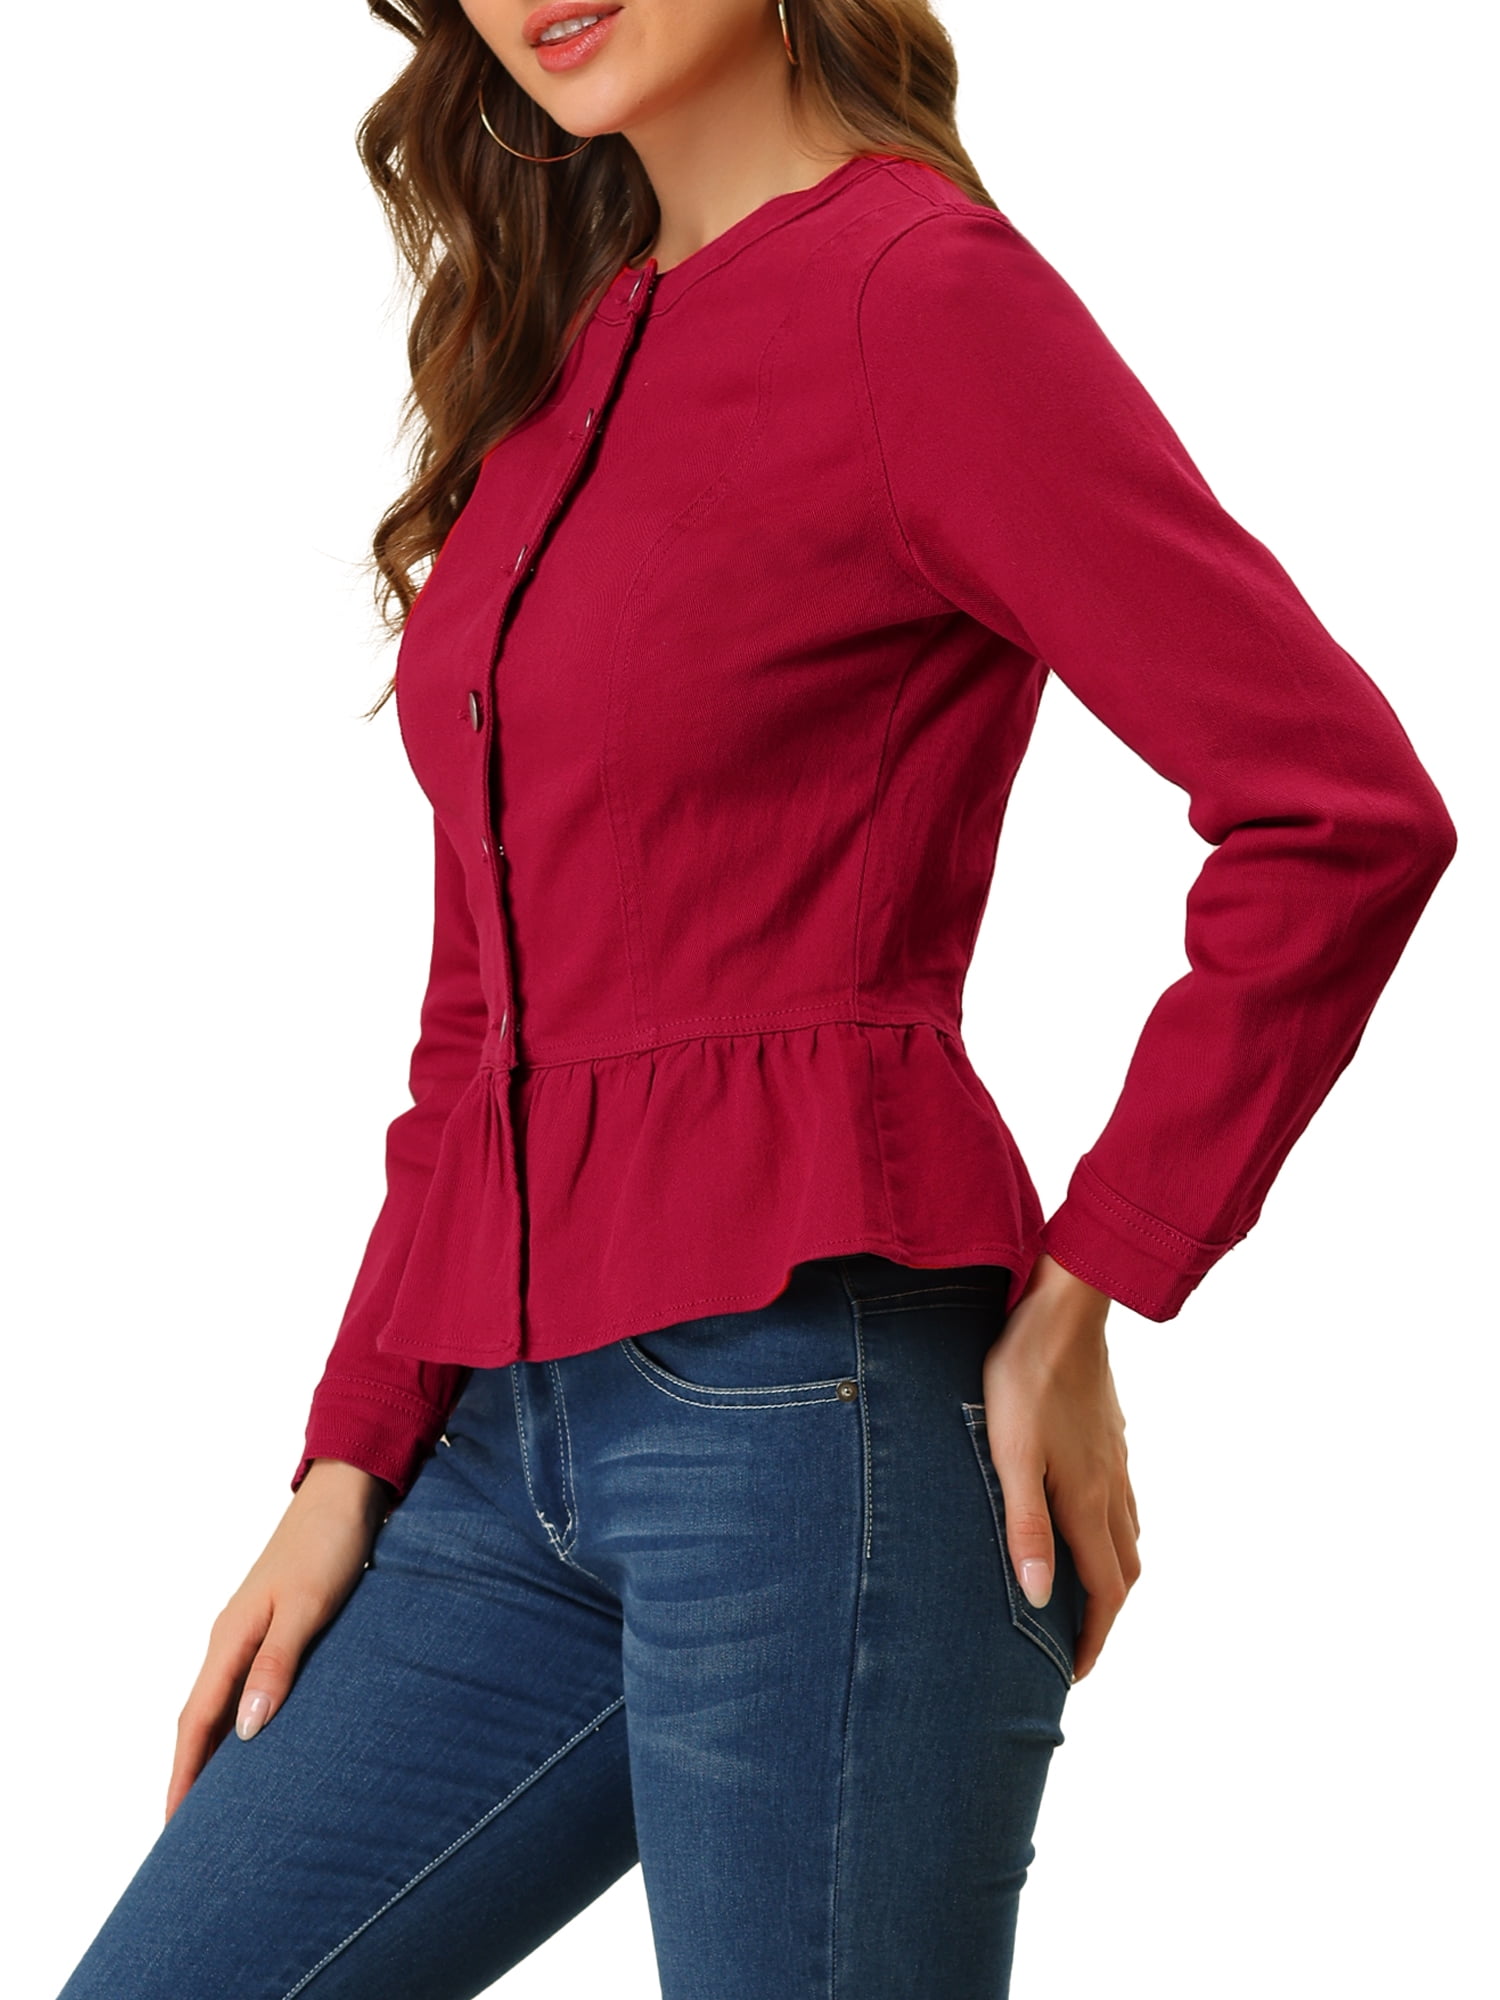 DPTALR Deals of the Day Lightning Deals Today Prime Womens Watermelon Red  Jacket Button down Long Sleeve Jacket Coats Button down Full Sleeve Blouse  Shirts Oversized Tops